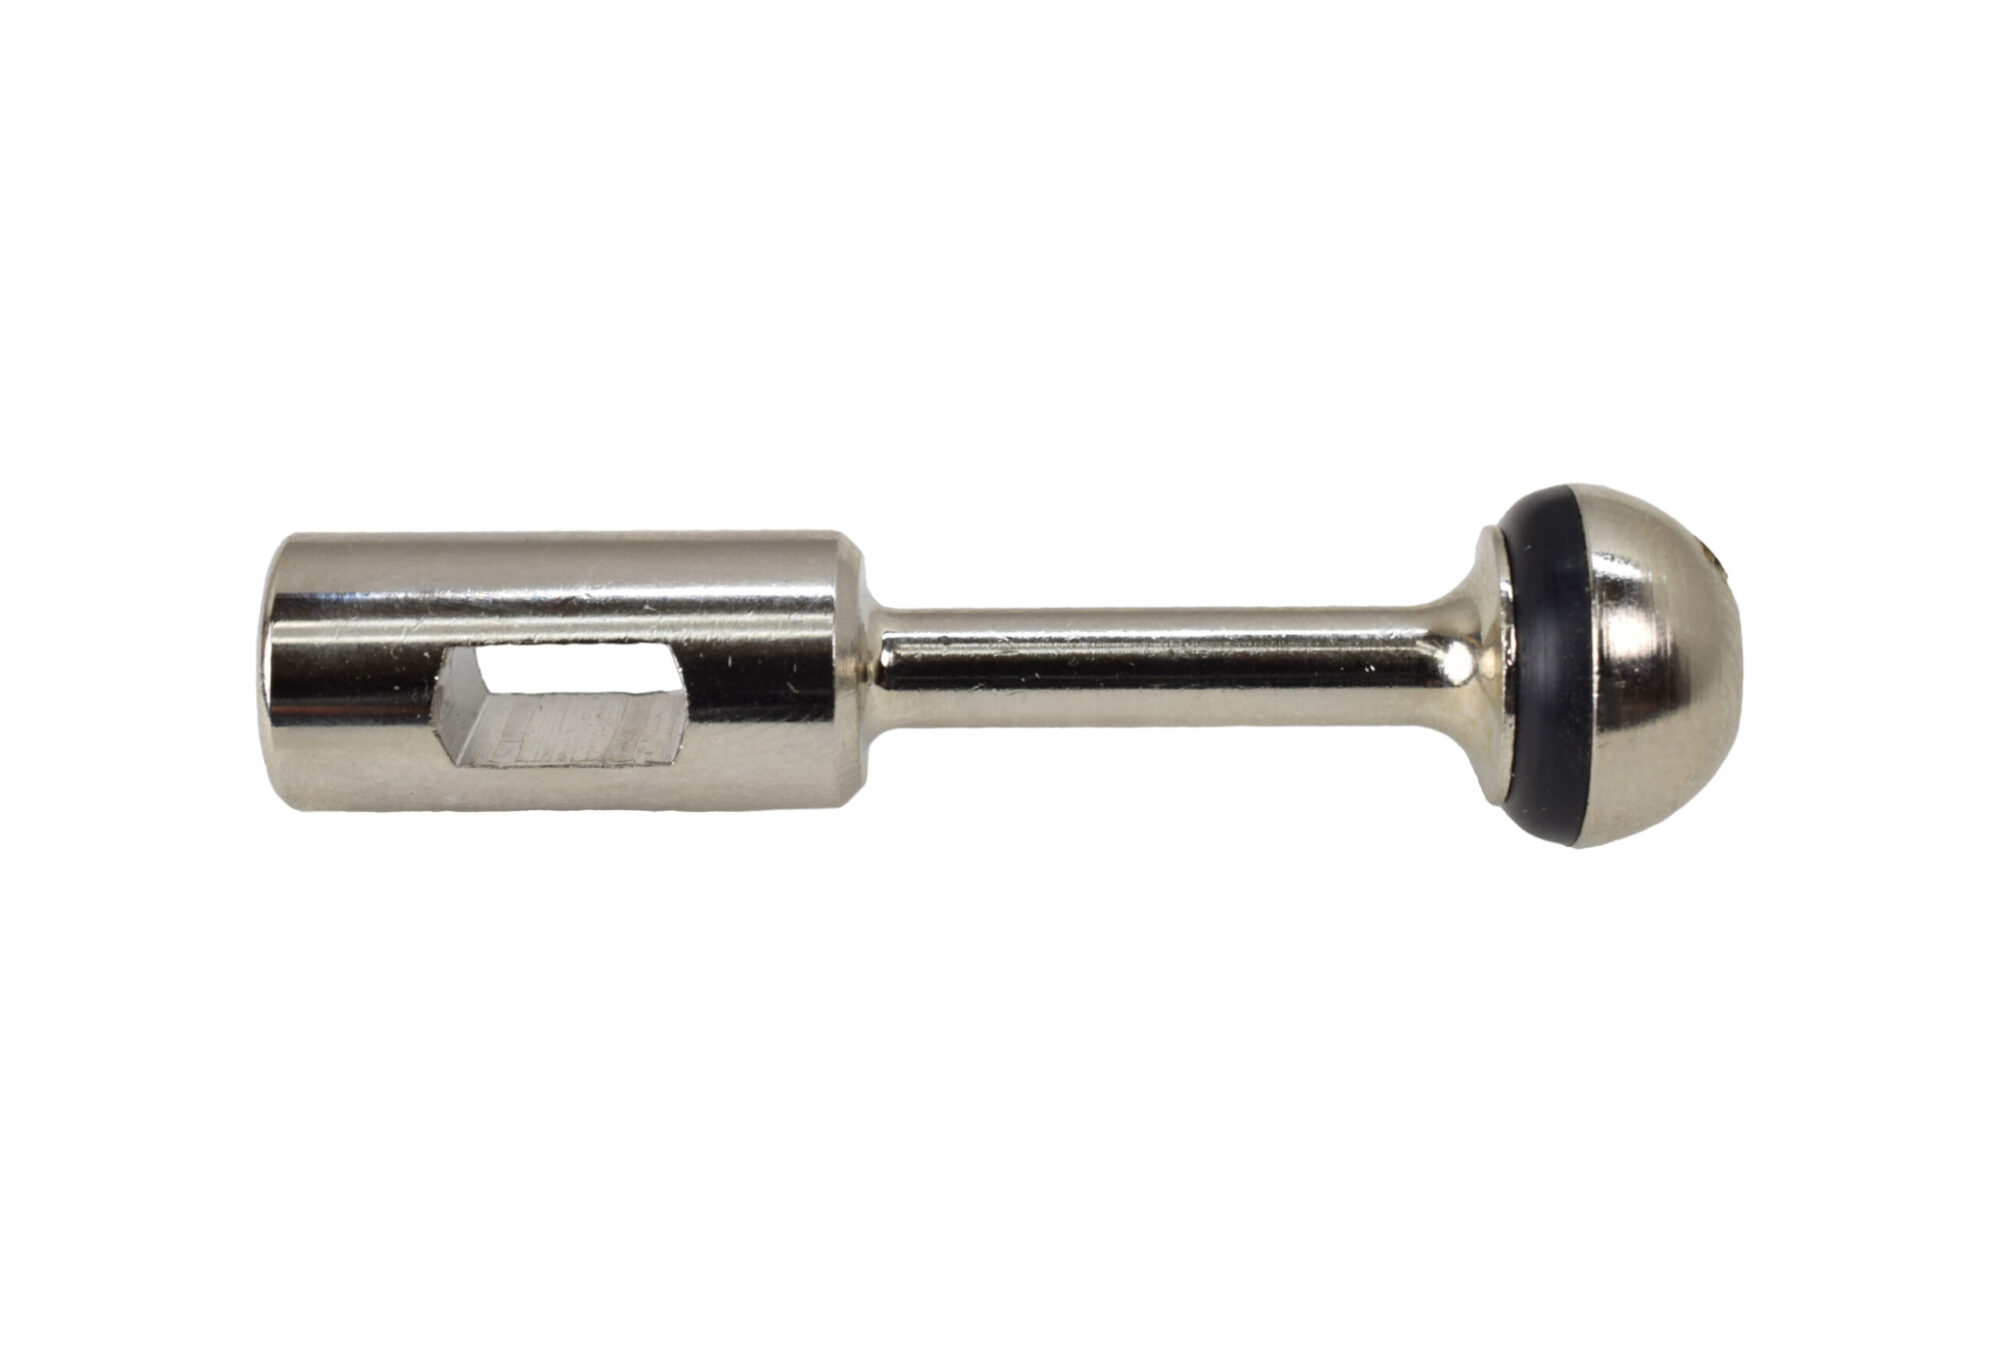 1322A Chrome Shaft - Complete with 1324 Washer and 1326 Nut